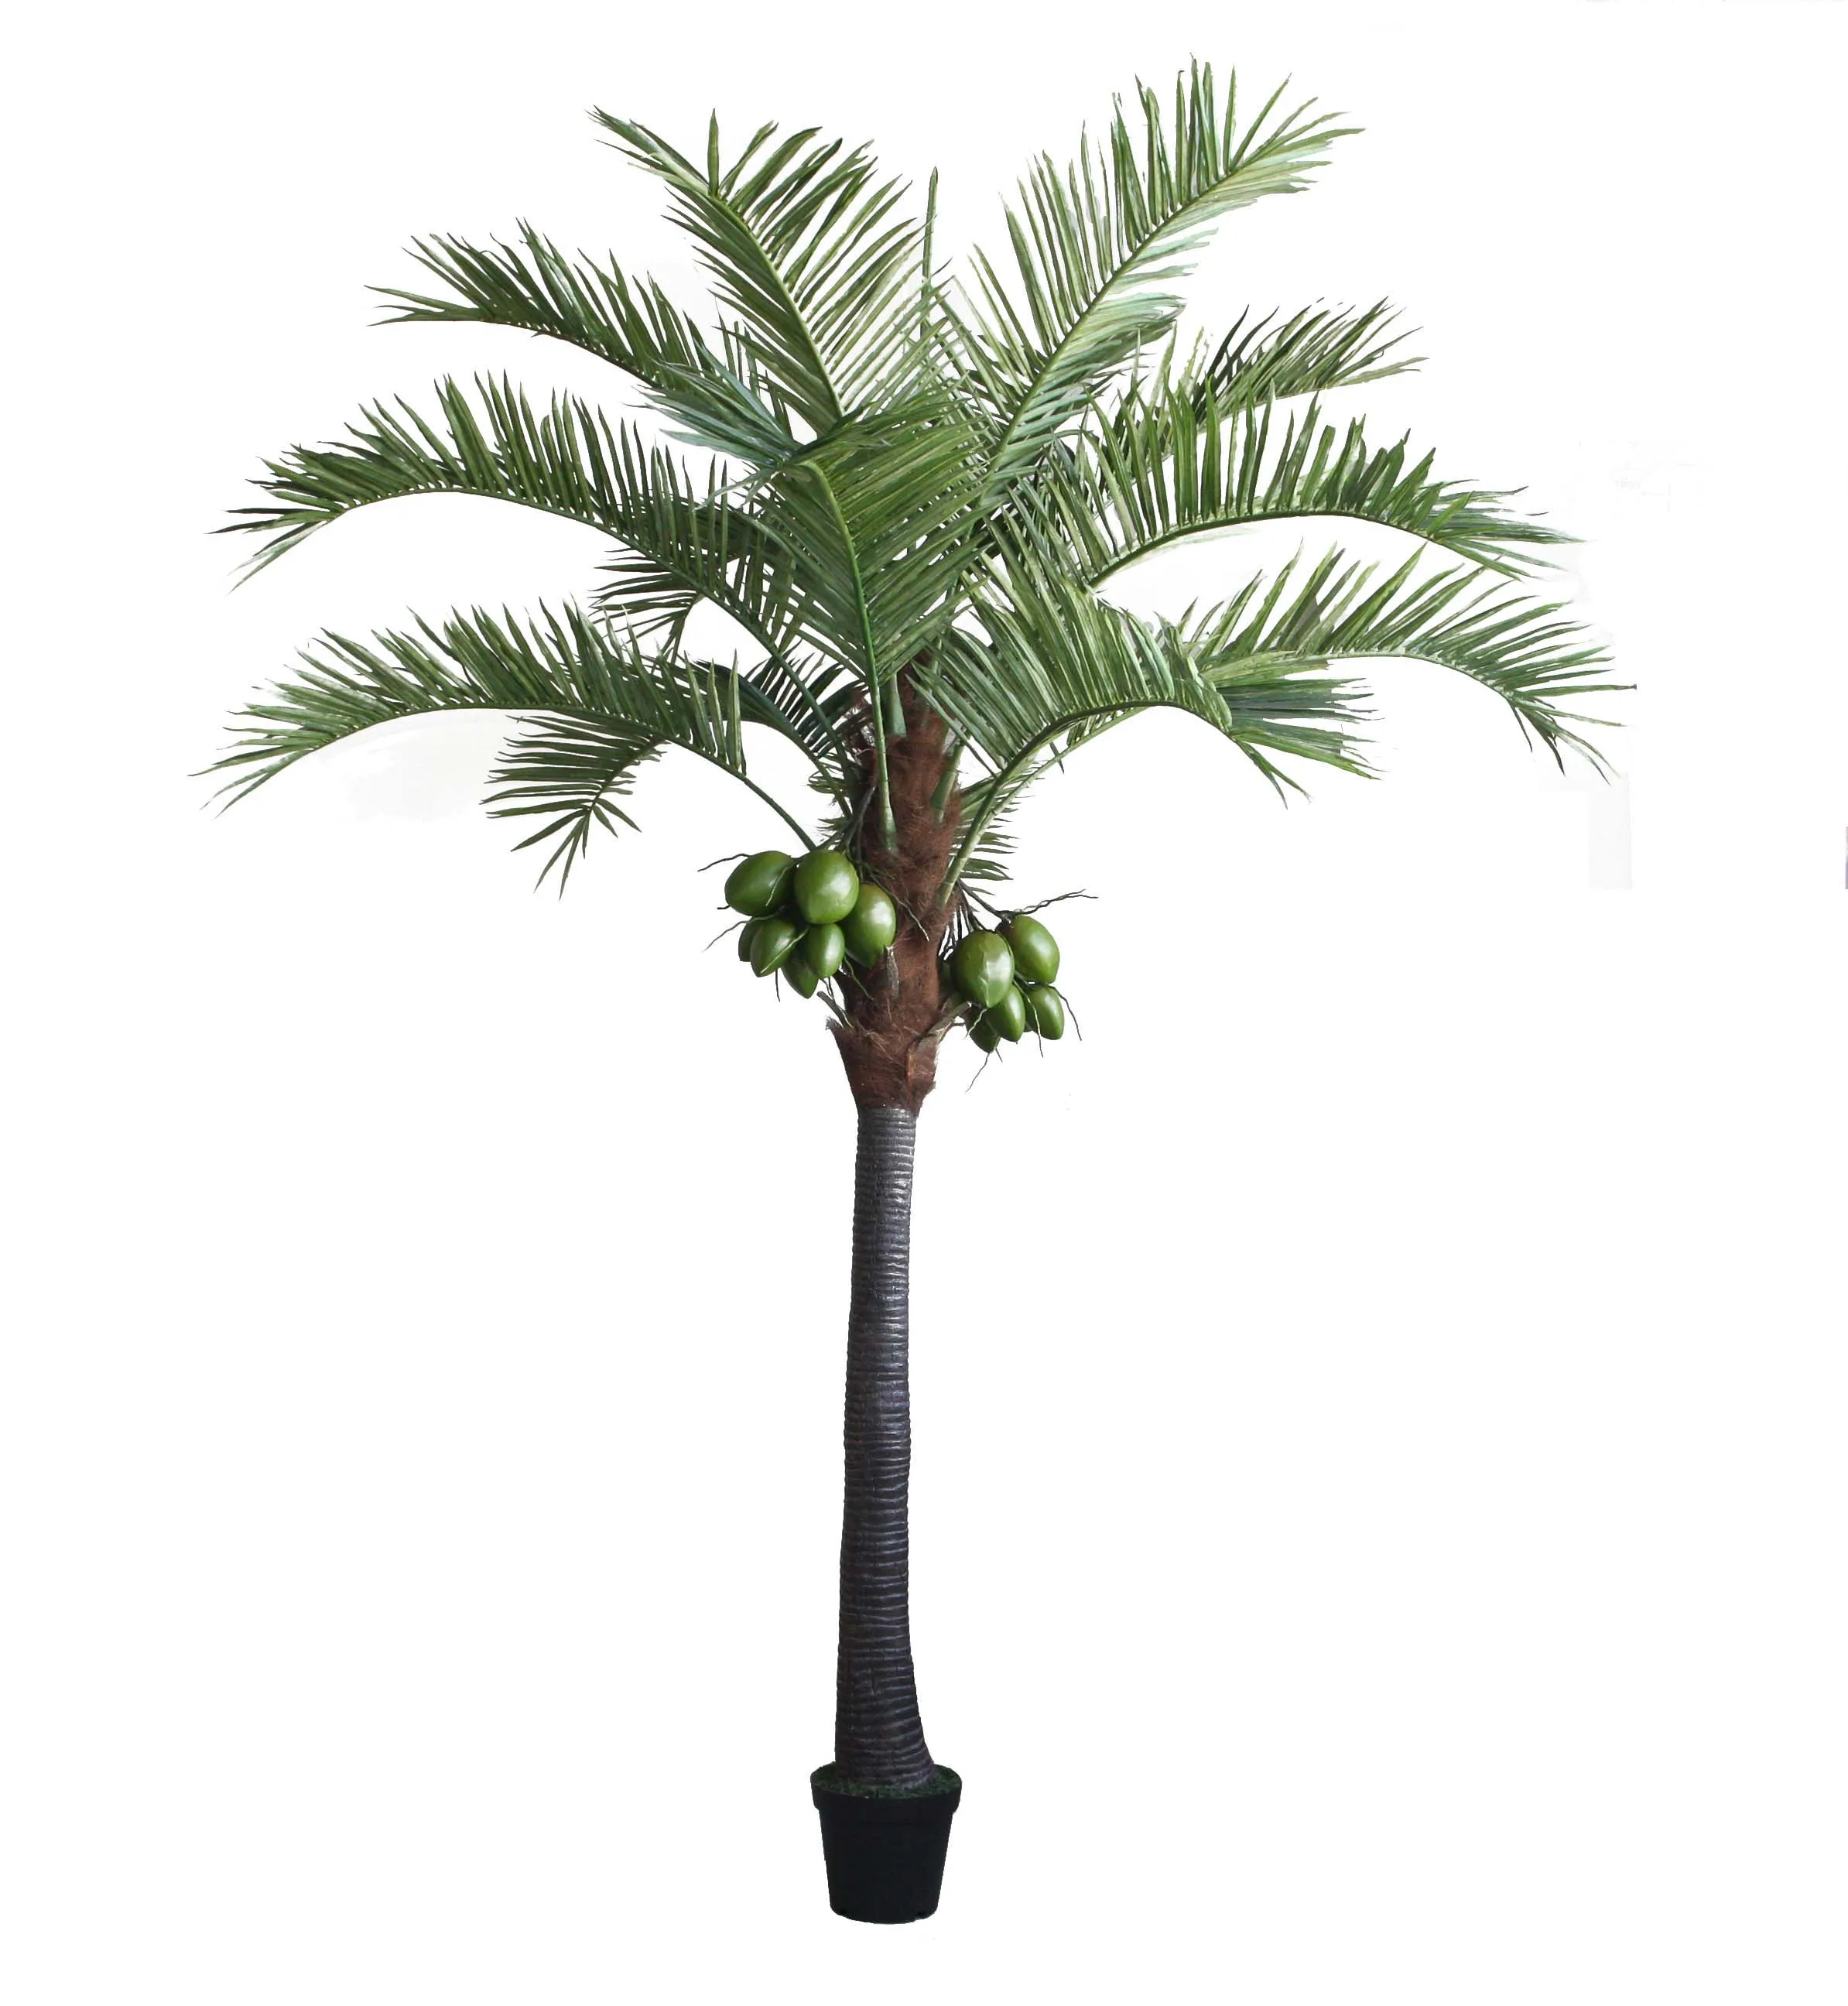 Outdoor Large Plastic Fake Coconut Palm Tree Make Artificial Palm Trees ...